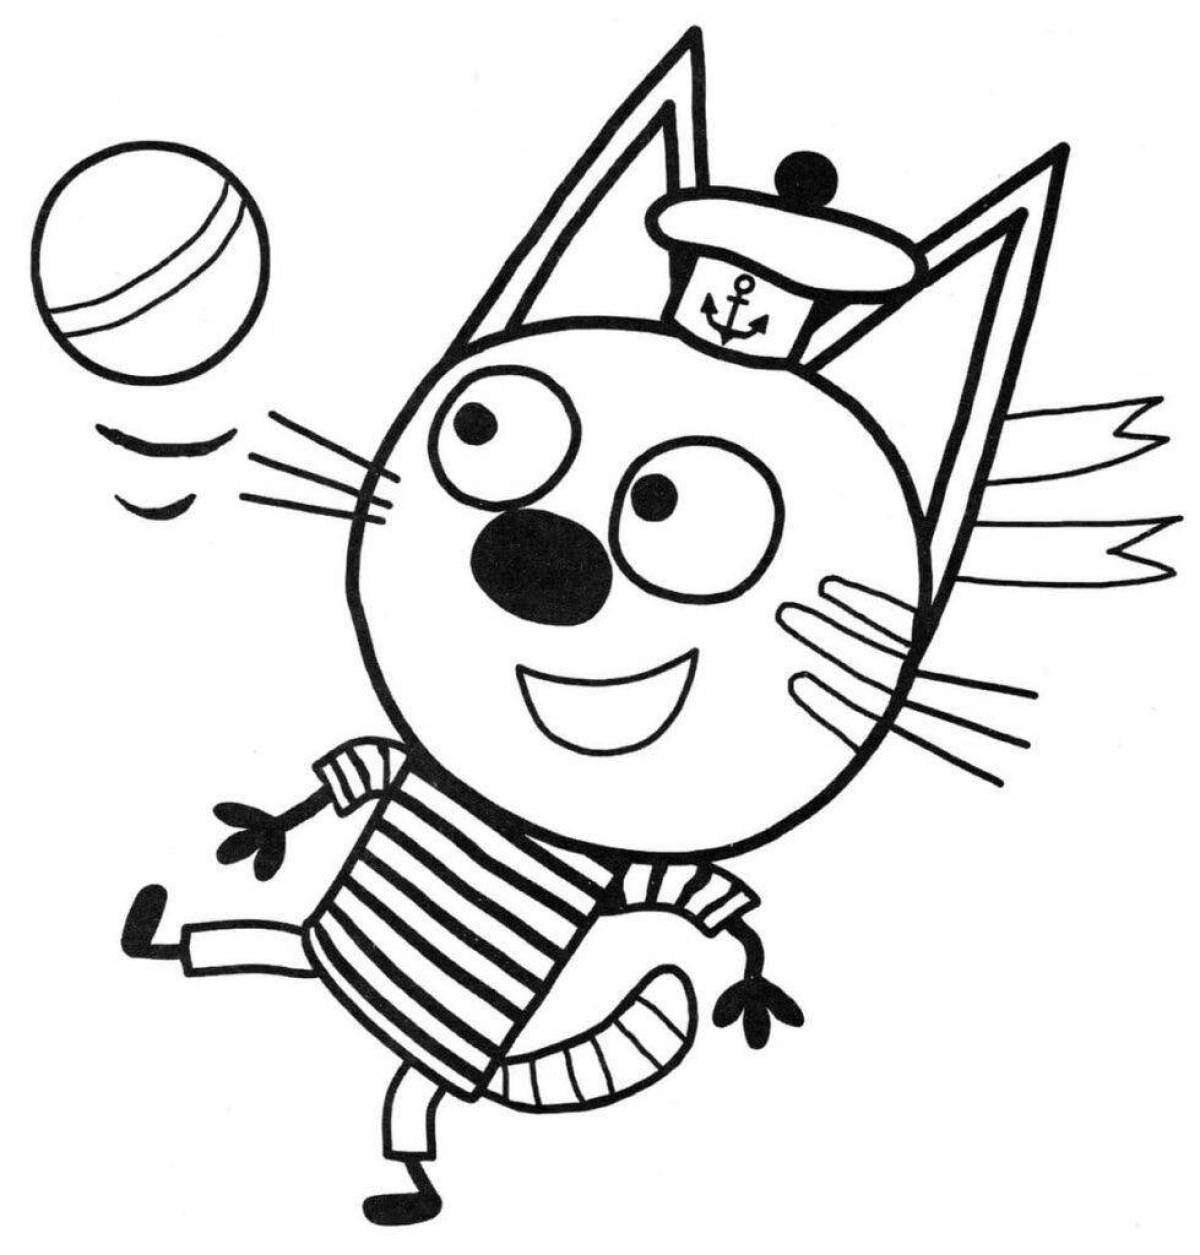 Three cats dazzling coloring book for boys